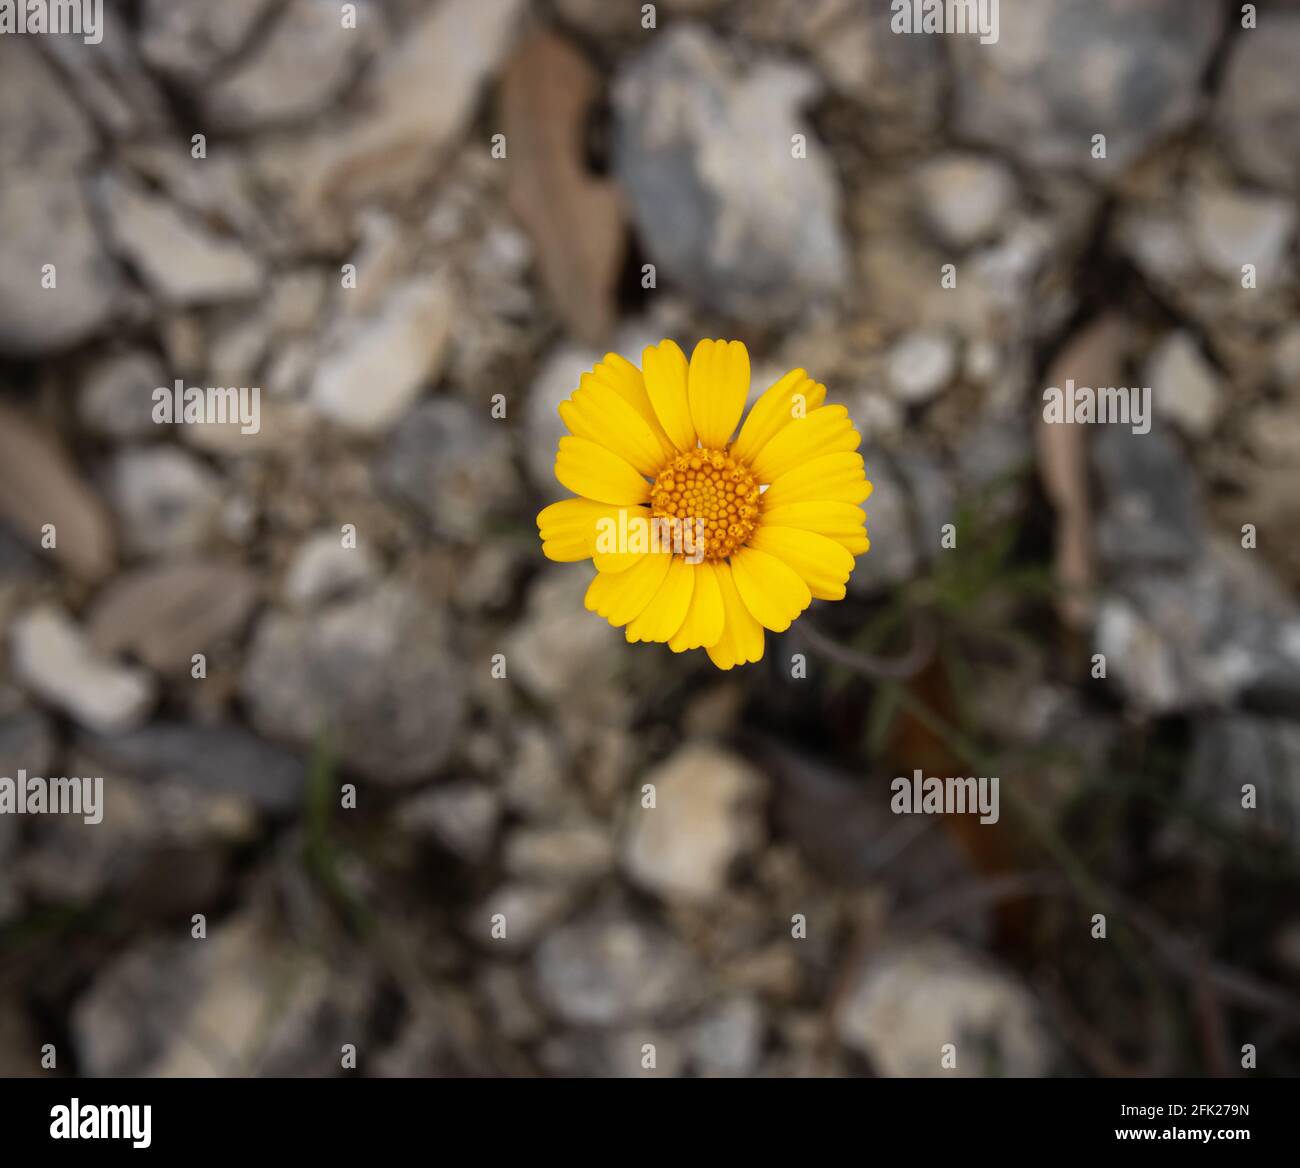 A Single Yellow Flower, tetraneuris acaulis, of the Texas Hill Country, Outside Bandera, Texas, in the Spring with a Rocky Background. Stock Photo